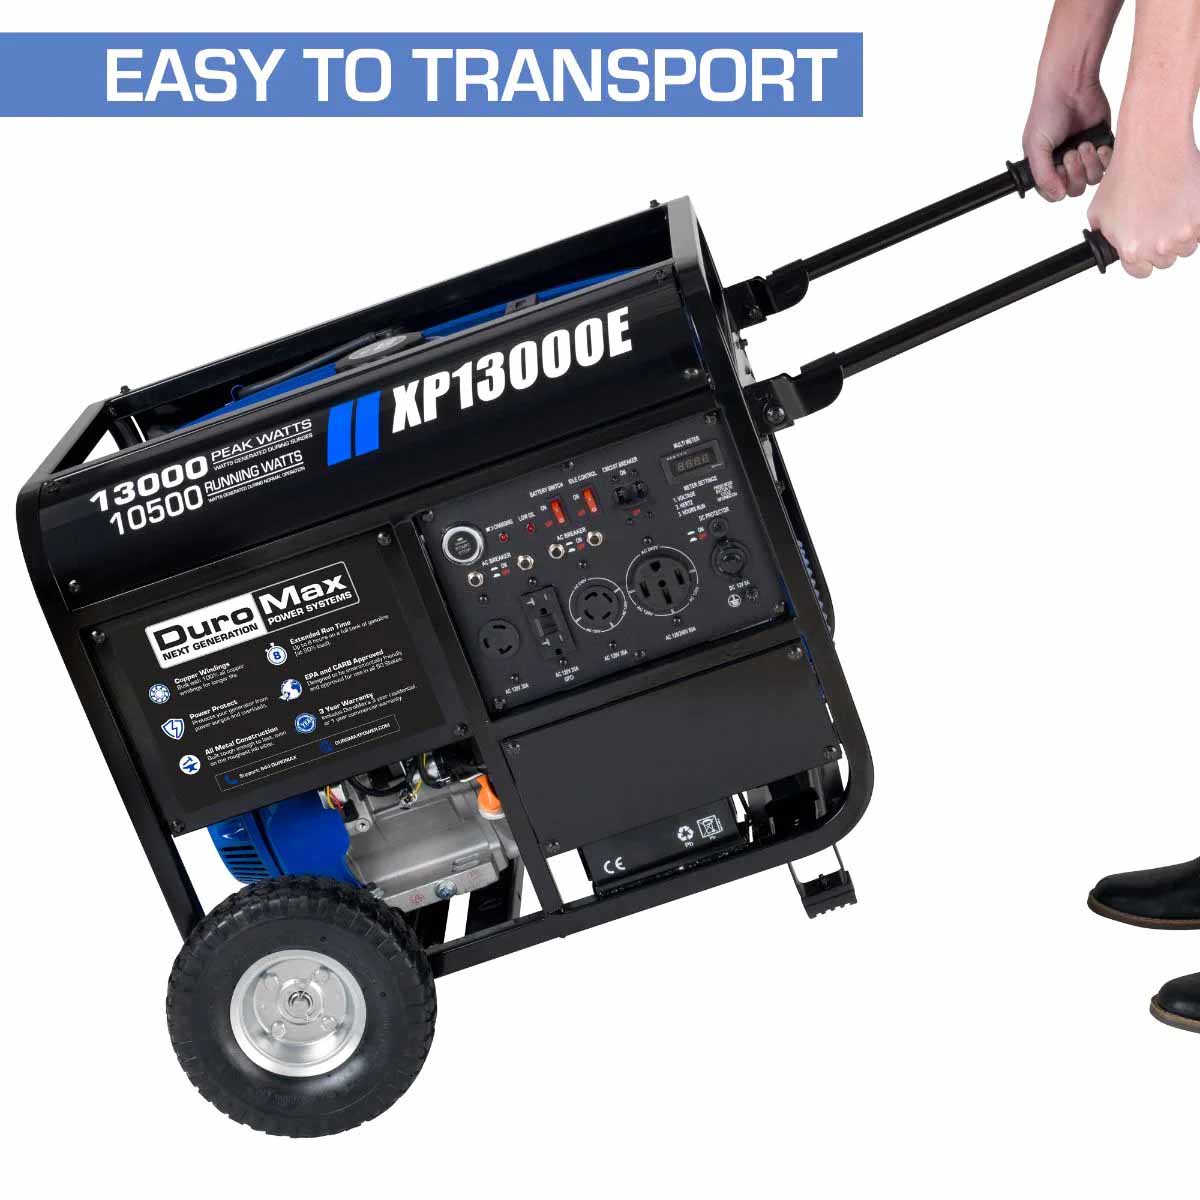 The DuroMax XP13000E Gasoline Portable Generator Is Easy To Transport